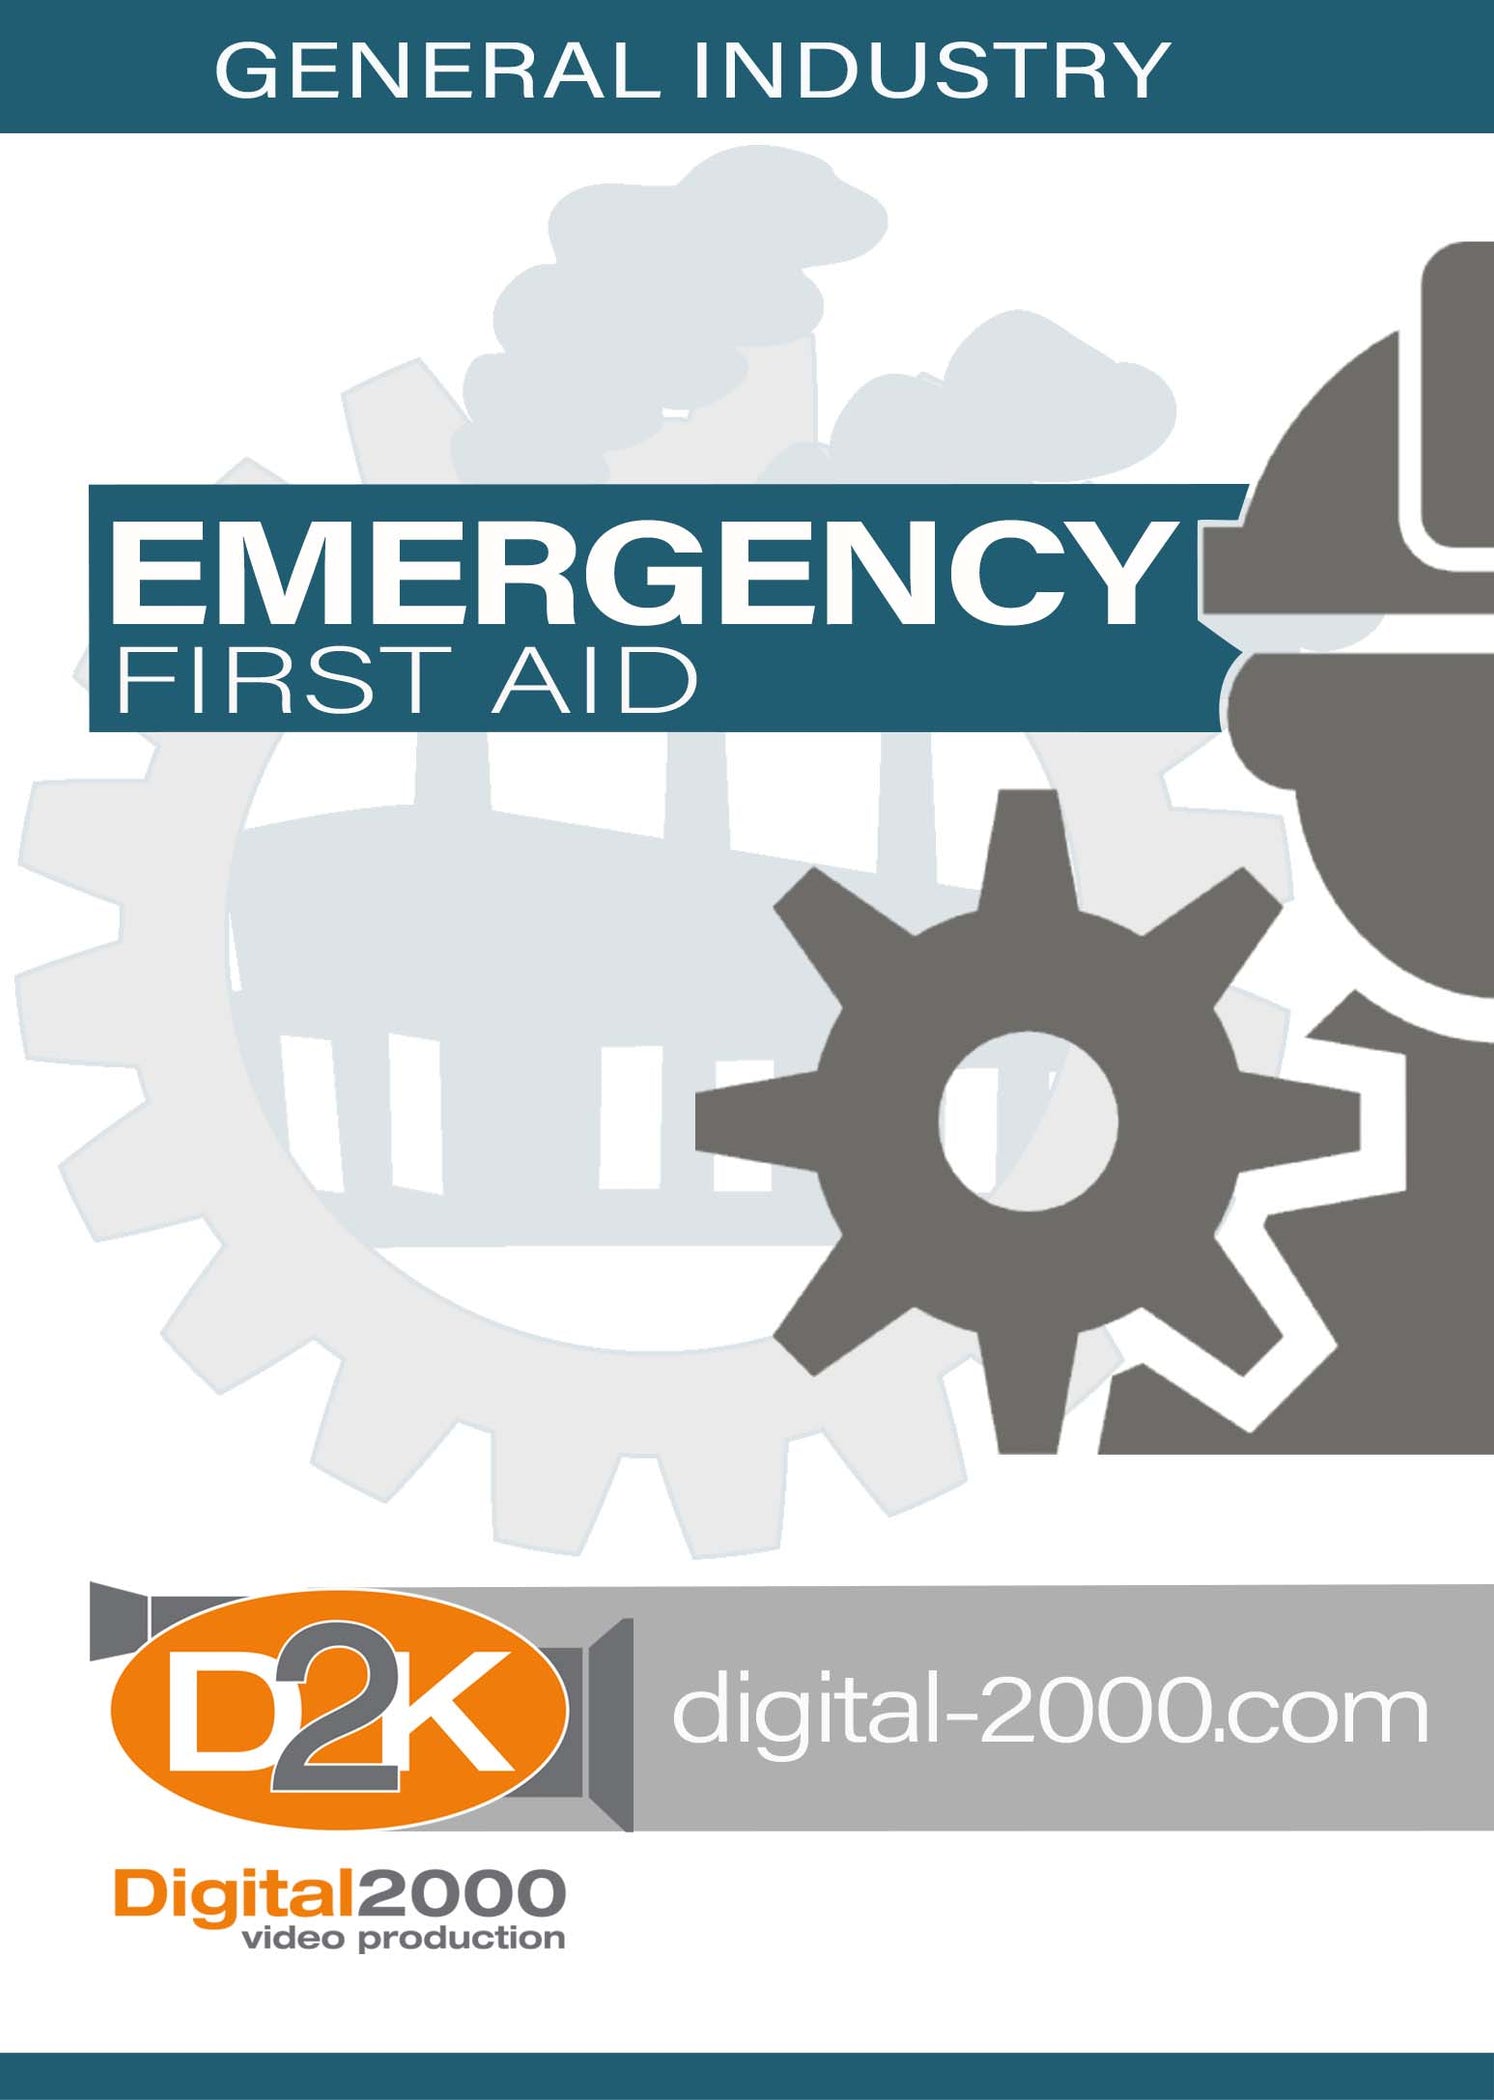 Emergency First Aid Training Video Course By Digital 2000